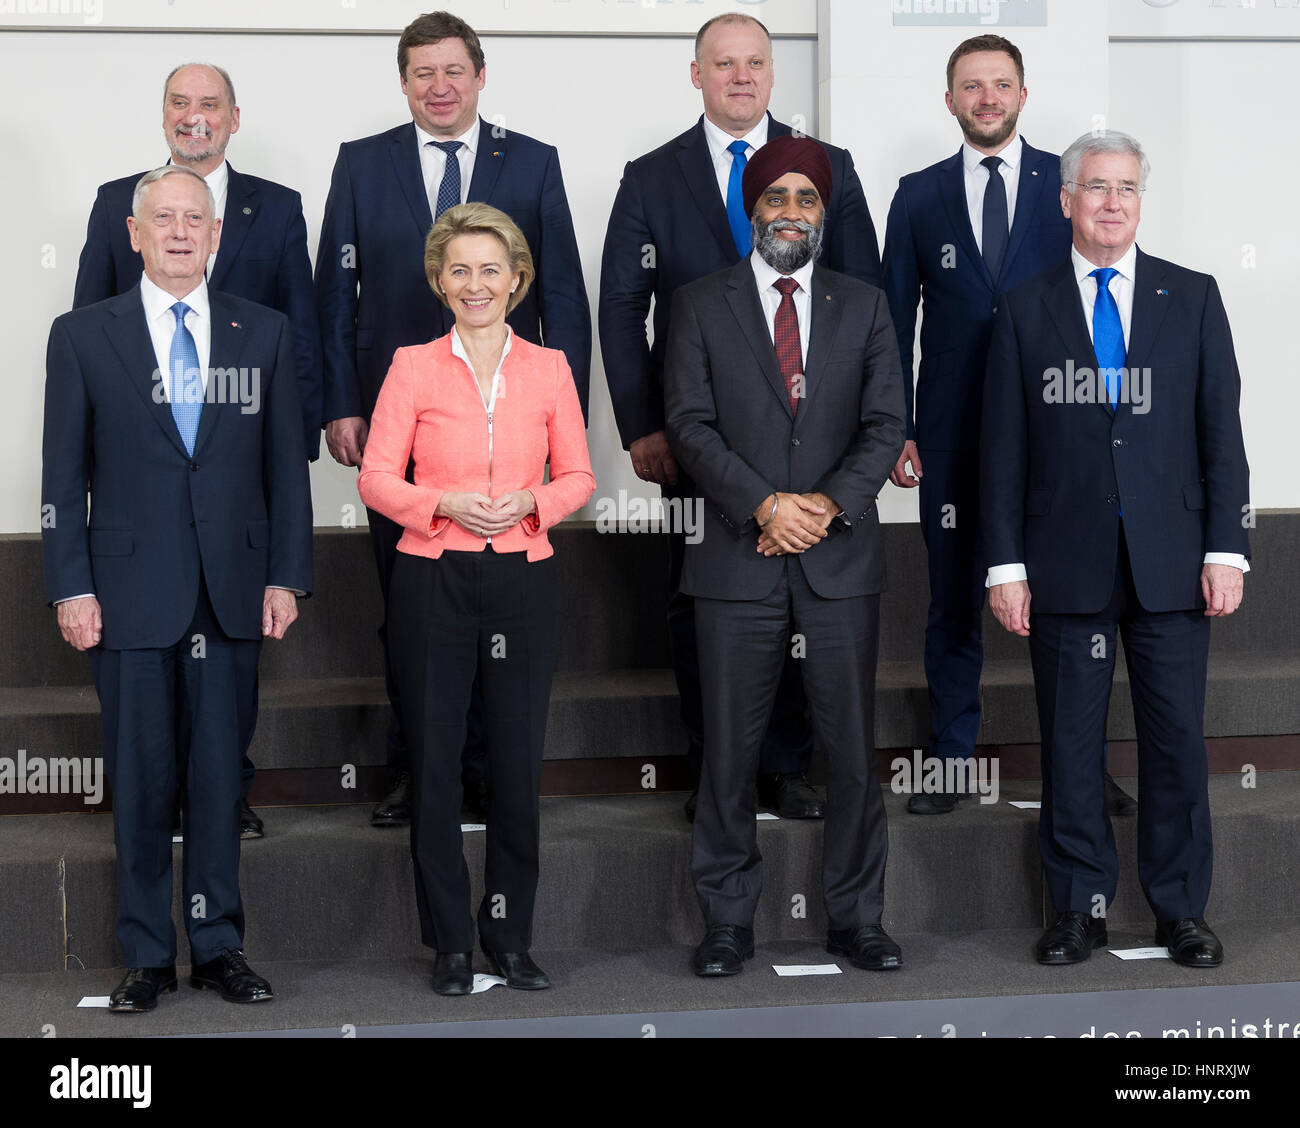 Brussels, Belgium. 15th Feb, 2017. From Left: United States of America Secretary of Defense Jim Mattis, Polish Minister of National Defense Antoni Macierewicz, Lithuanian Minister of National Defense Raimundas Karoblis, German Minister of Defense Ursula Gertrud von der Leyen, Latvian Minister of Defense Raimonds Bergmanis, Canadian Minister of National Defense Harjit Singh Sajjan, Estonian Minister of Defense Margus Tsahkna and the United Kingdom Secretary of State for Defense Sir Michael Fallon are posing during a NATO Defence Ministers meeting in the NATO headquarter. - NO WIRE SER Stock Photo